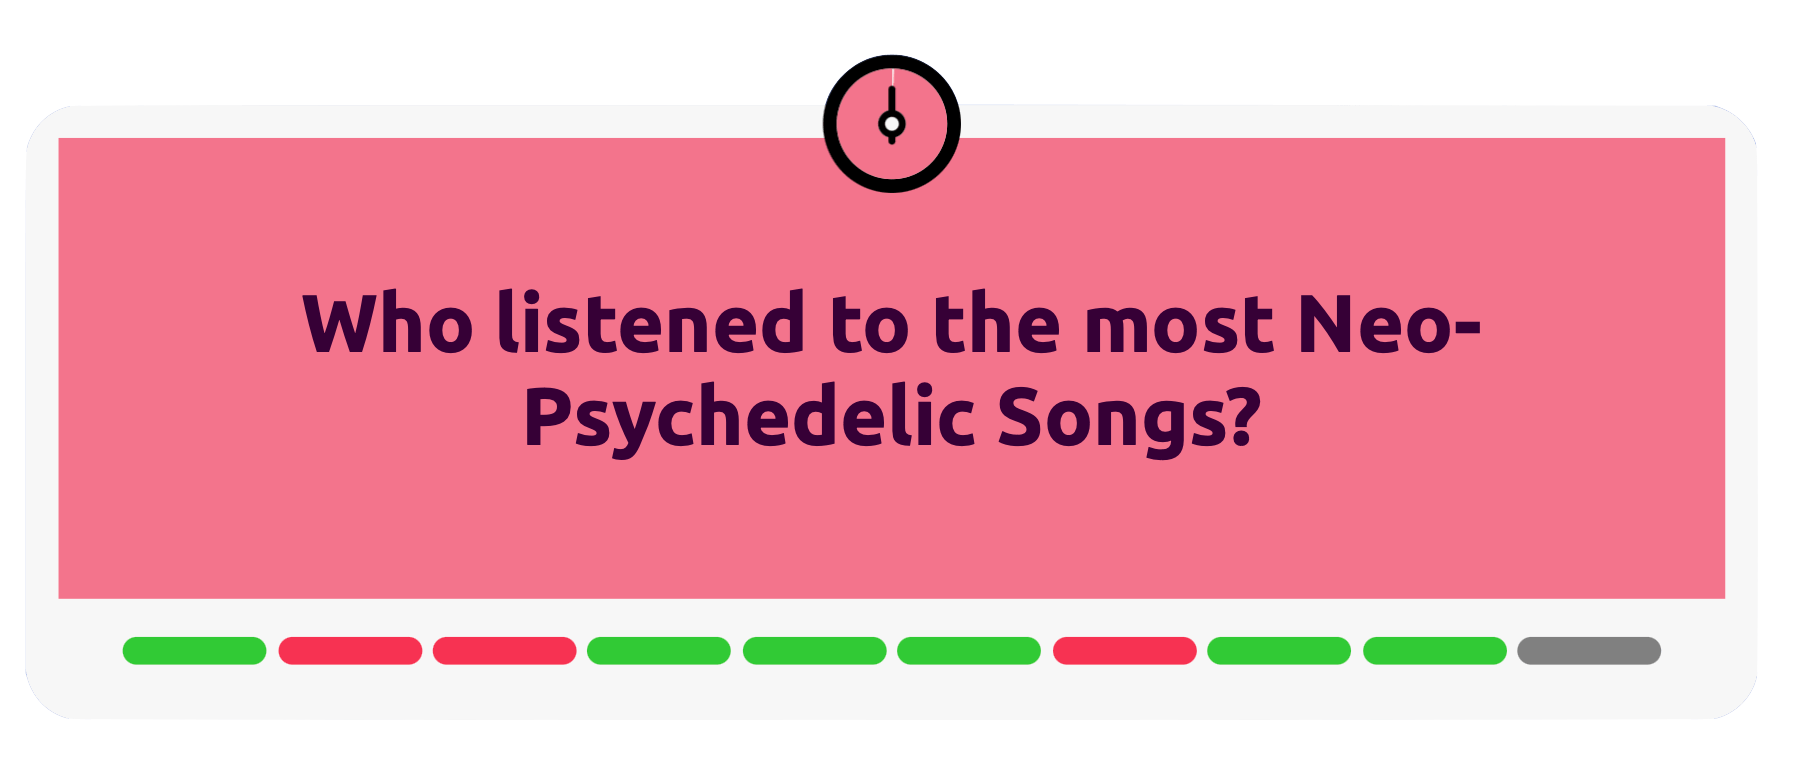 Who listened to the most Neo-Psycedelic songs?